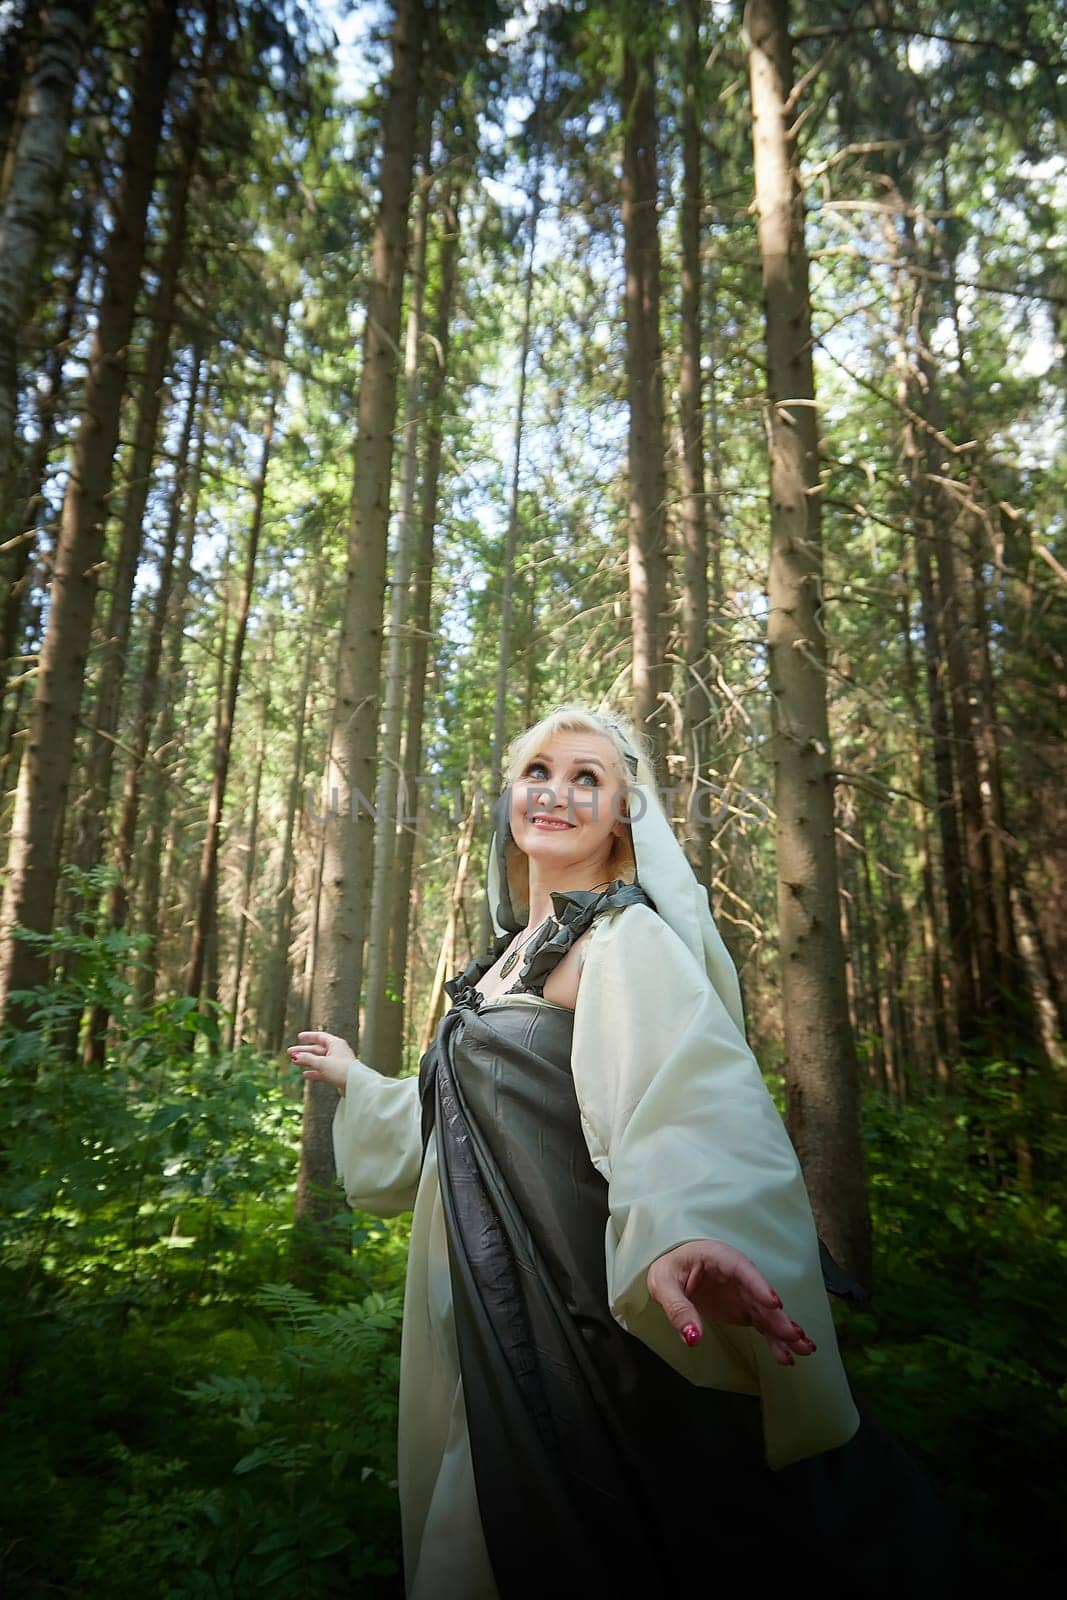 Adult mature woman 40-60 in a green long fairy dress in forest. Photo shoot in style of dryad and queen of nature. Fairy in beautiful green summer forest. Concept of caring for nature